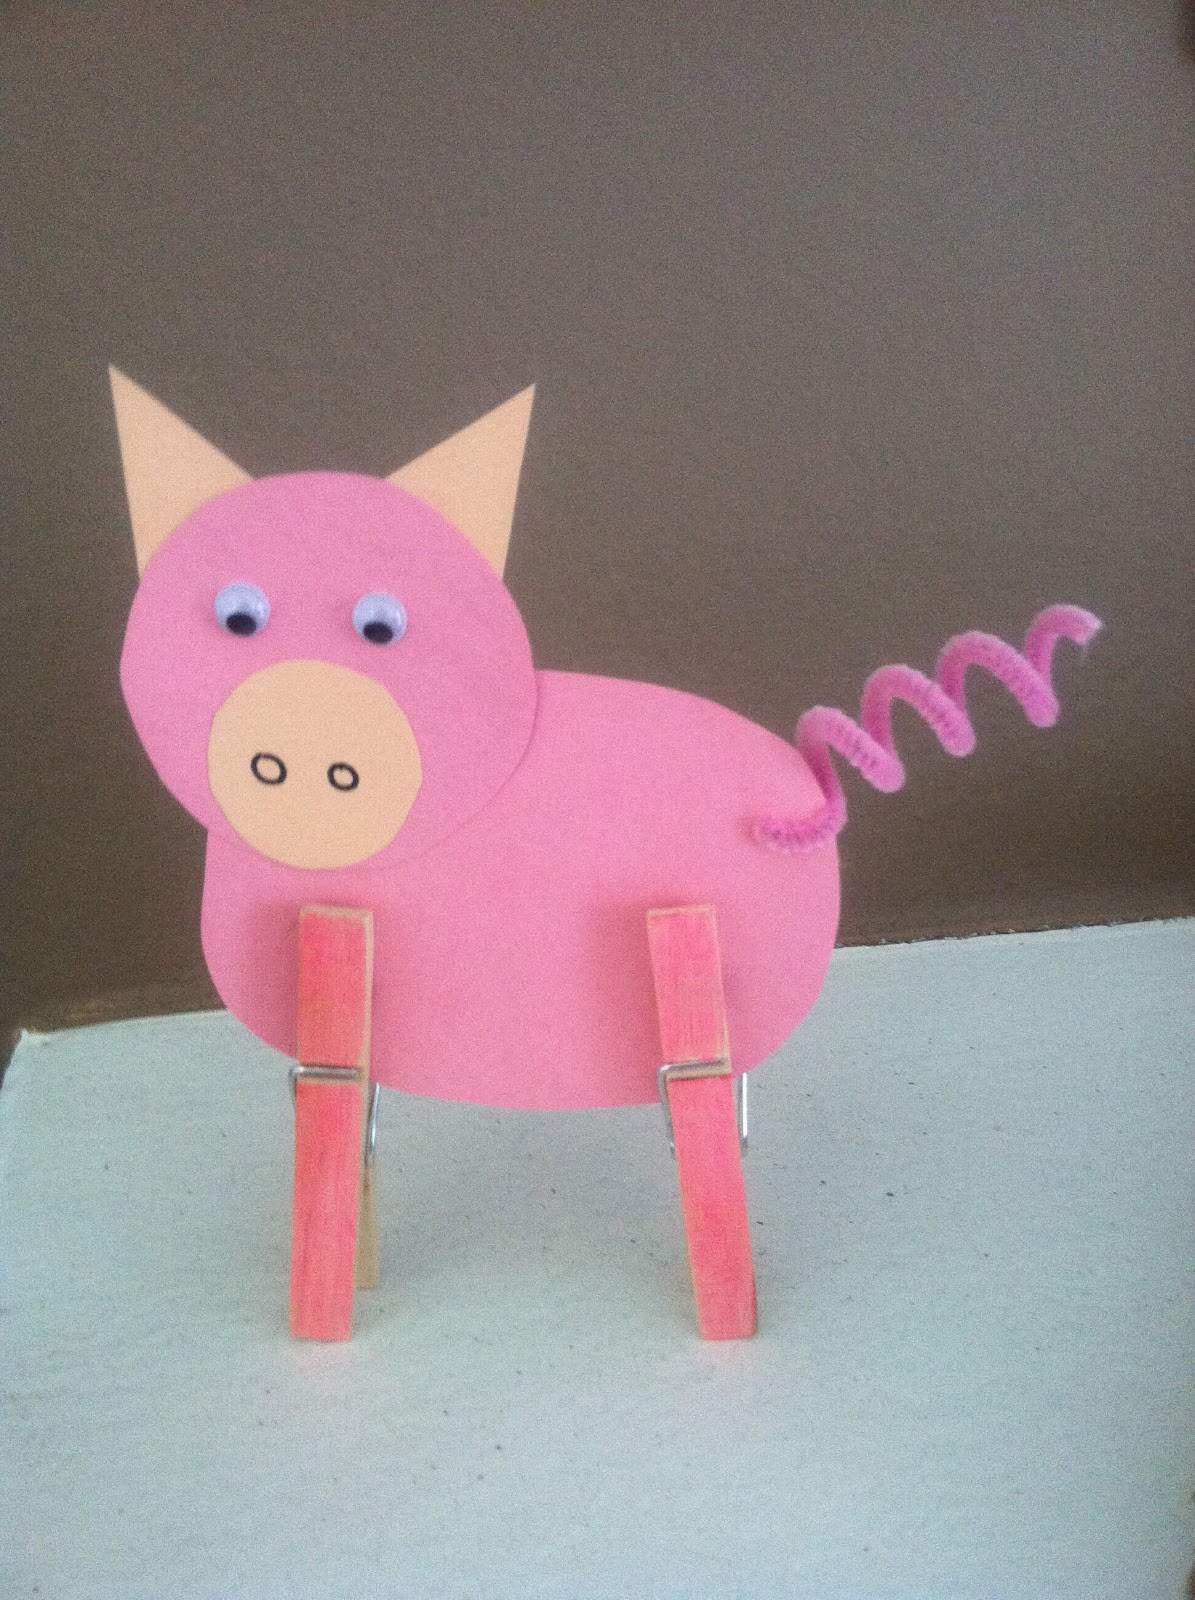 Toddler Arts And Crafts Ideas
 9 Cute Pig Arts And Crafts Ideas For Kids and Toddlers